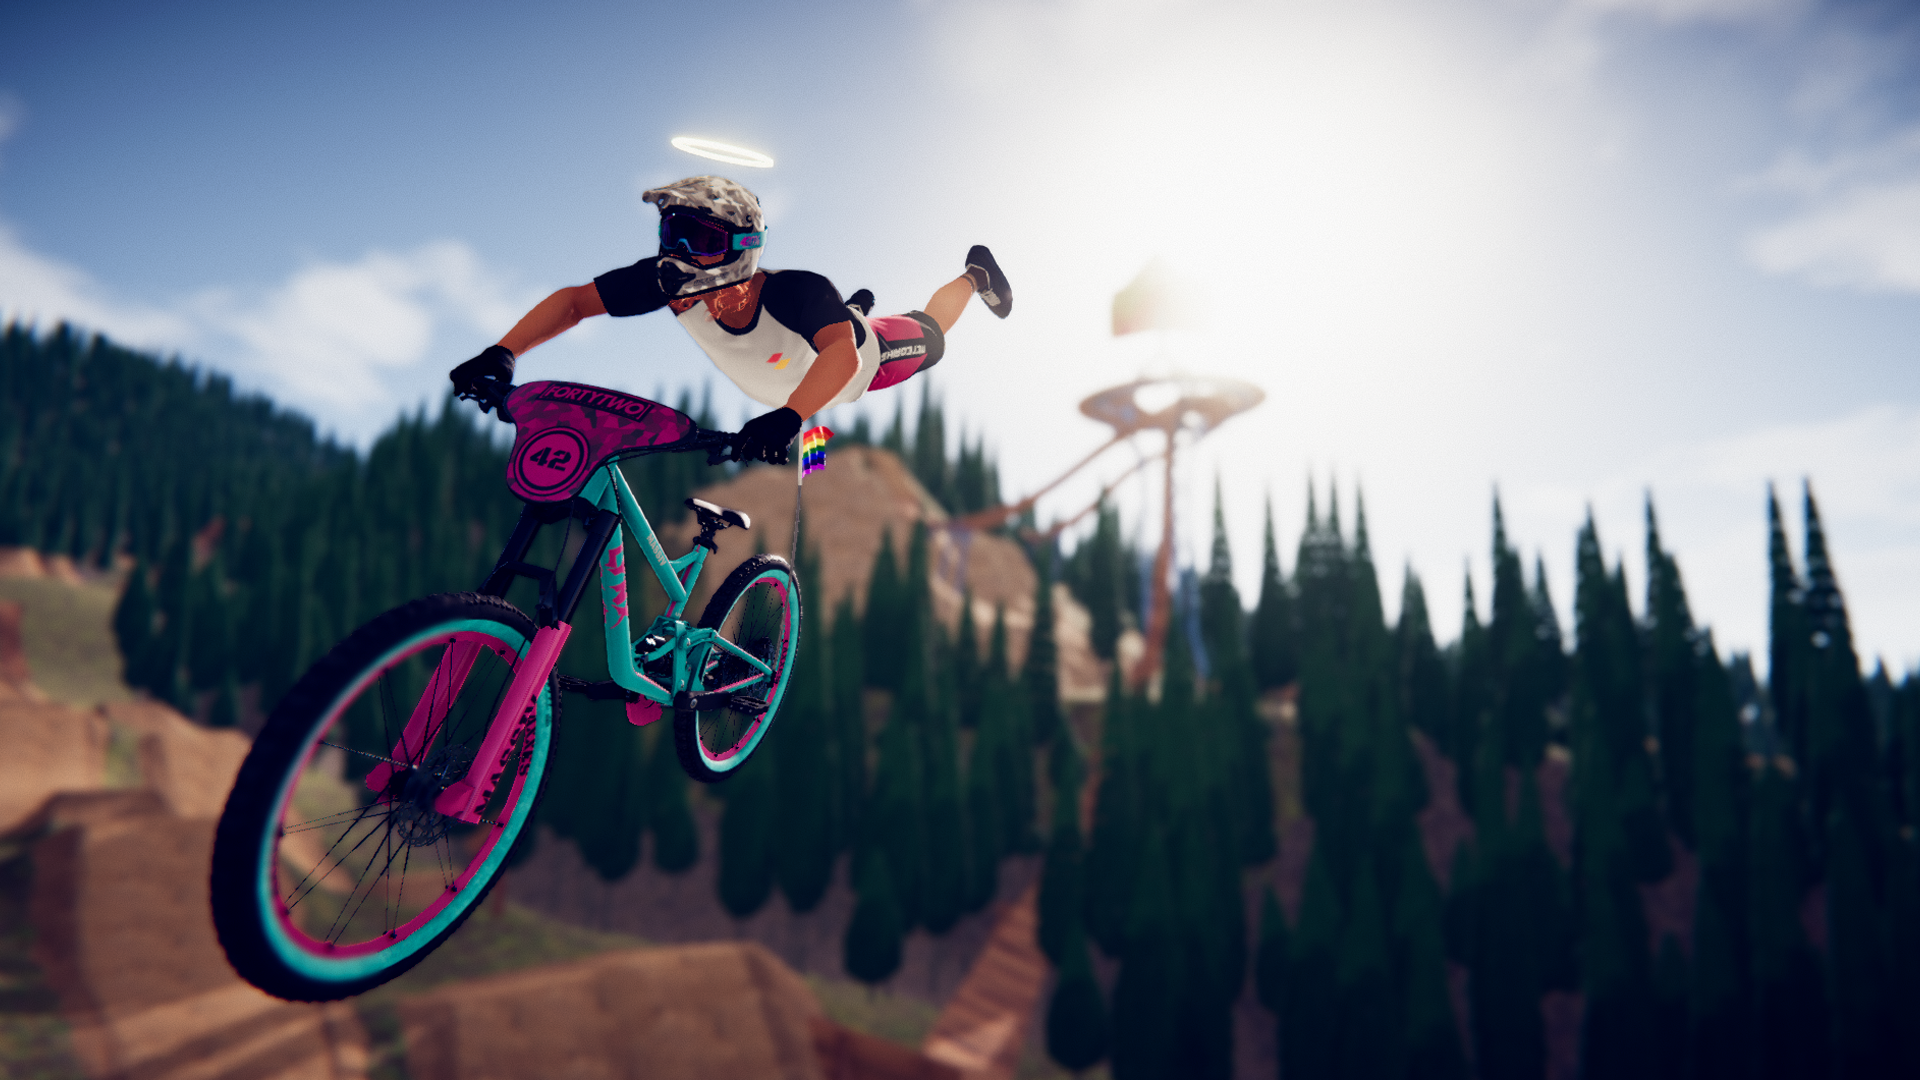 June X|S Xbox to Descenders Series - Coming in Operation Sports